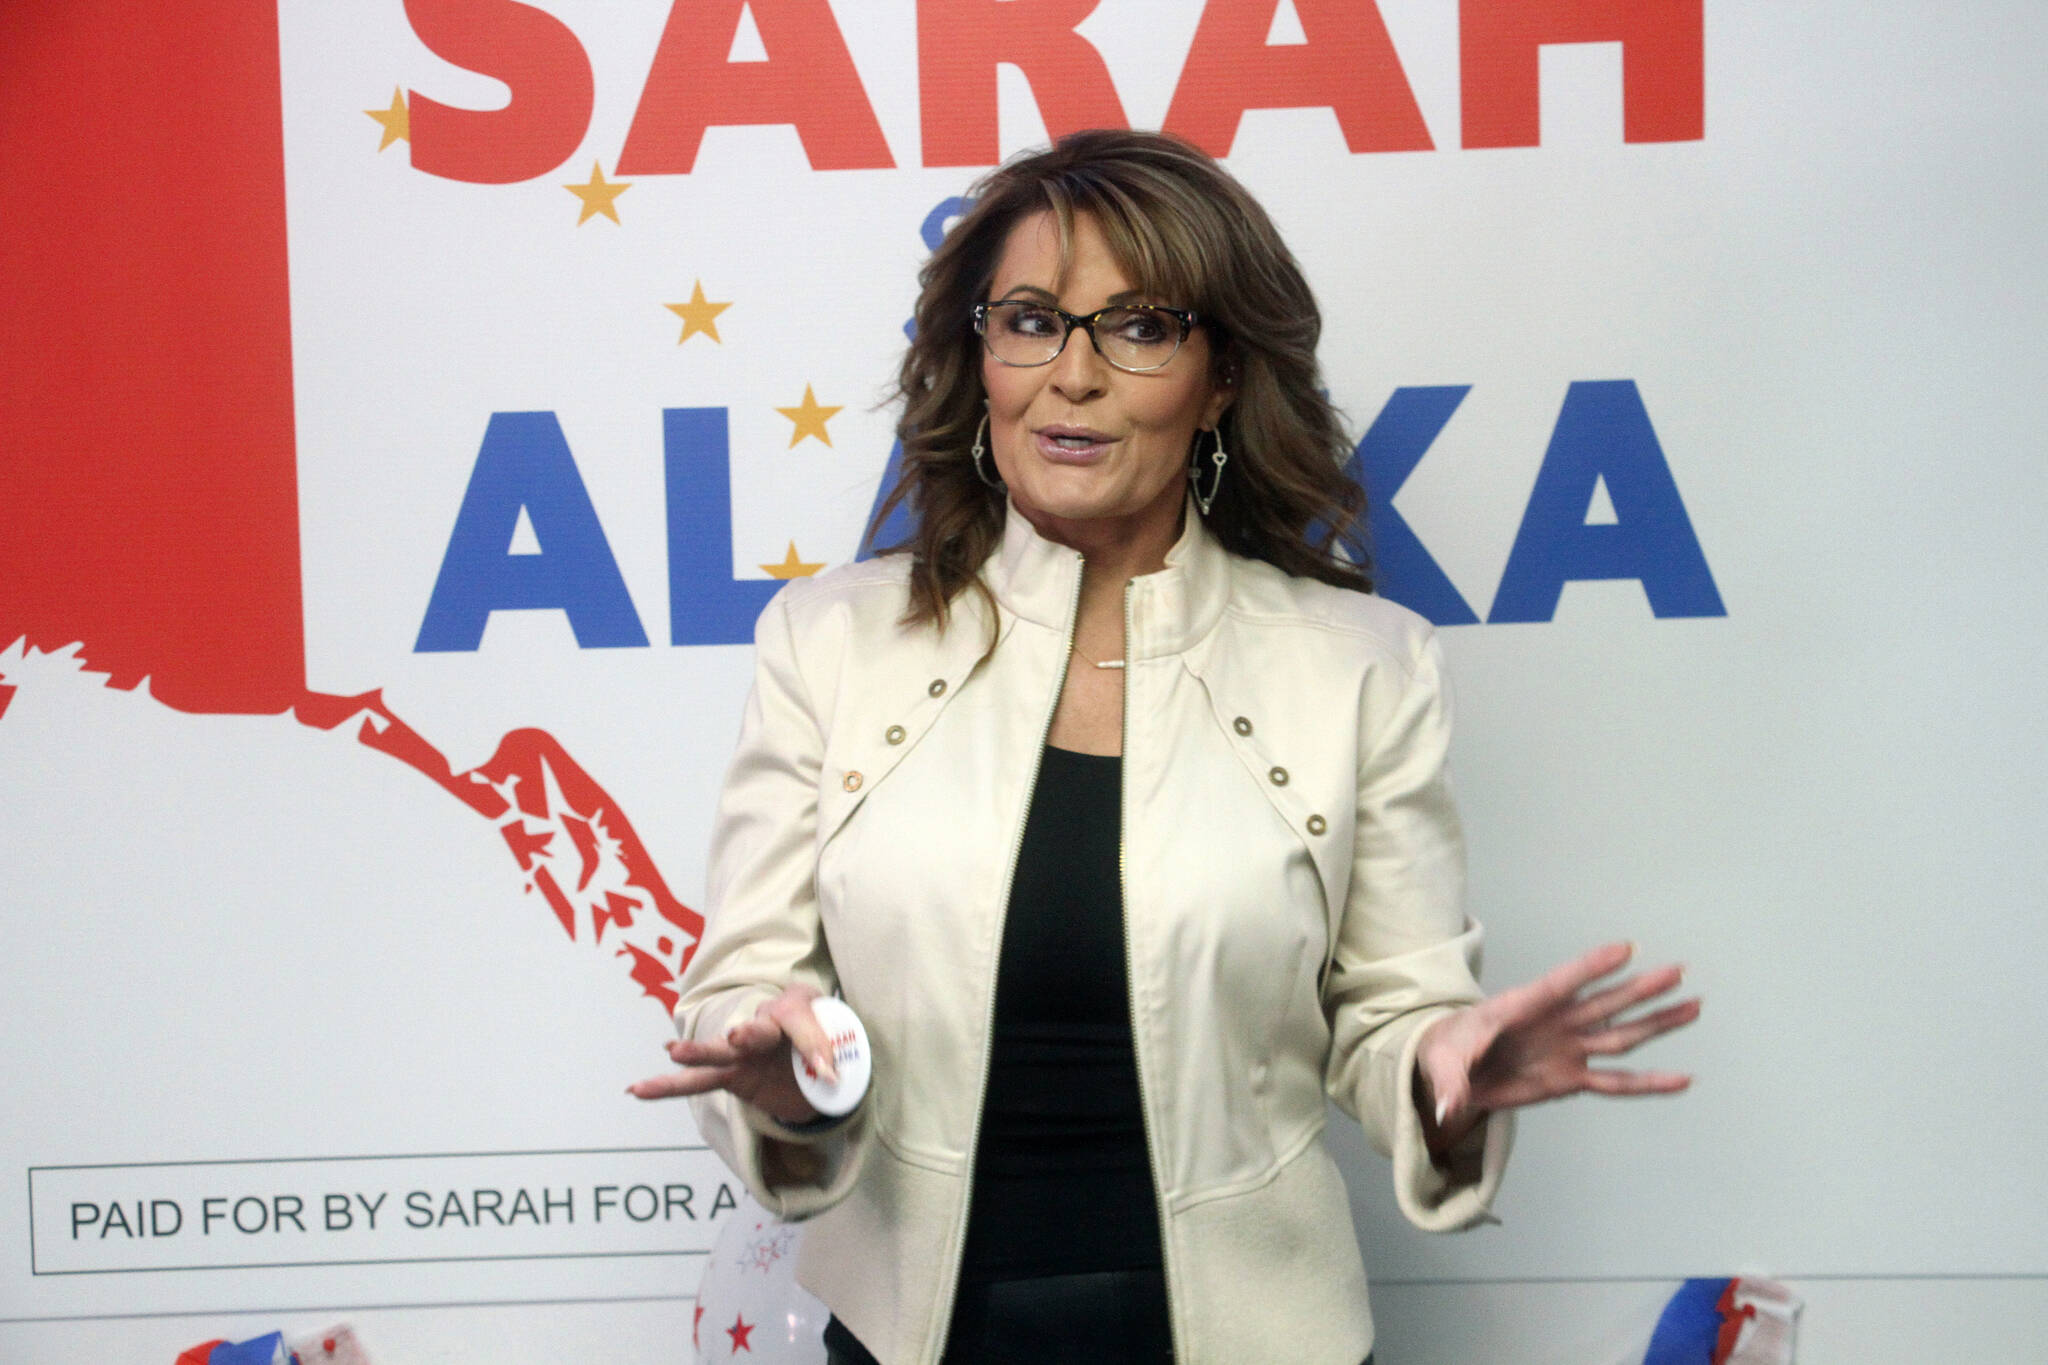 Former Alaska Gov. Sarah Palin addresses supporters at the opening of her new campaign headquarters in Anchorage, Alaska, on Wednesday, April 20, 2022. (AP Photo/Mark Thiessen,File)